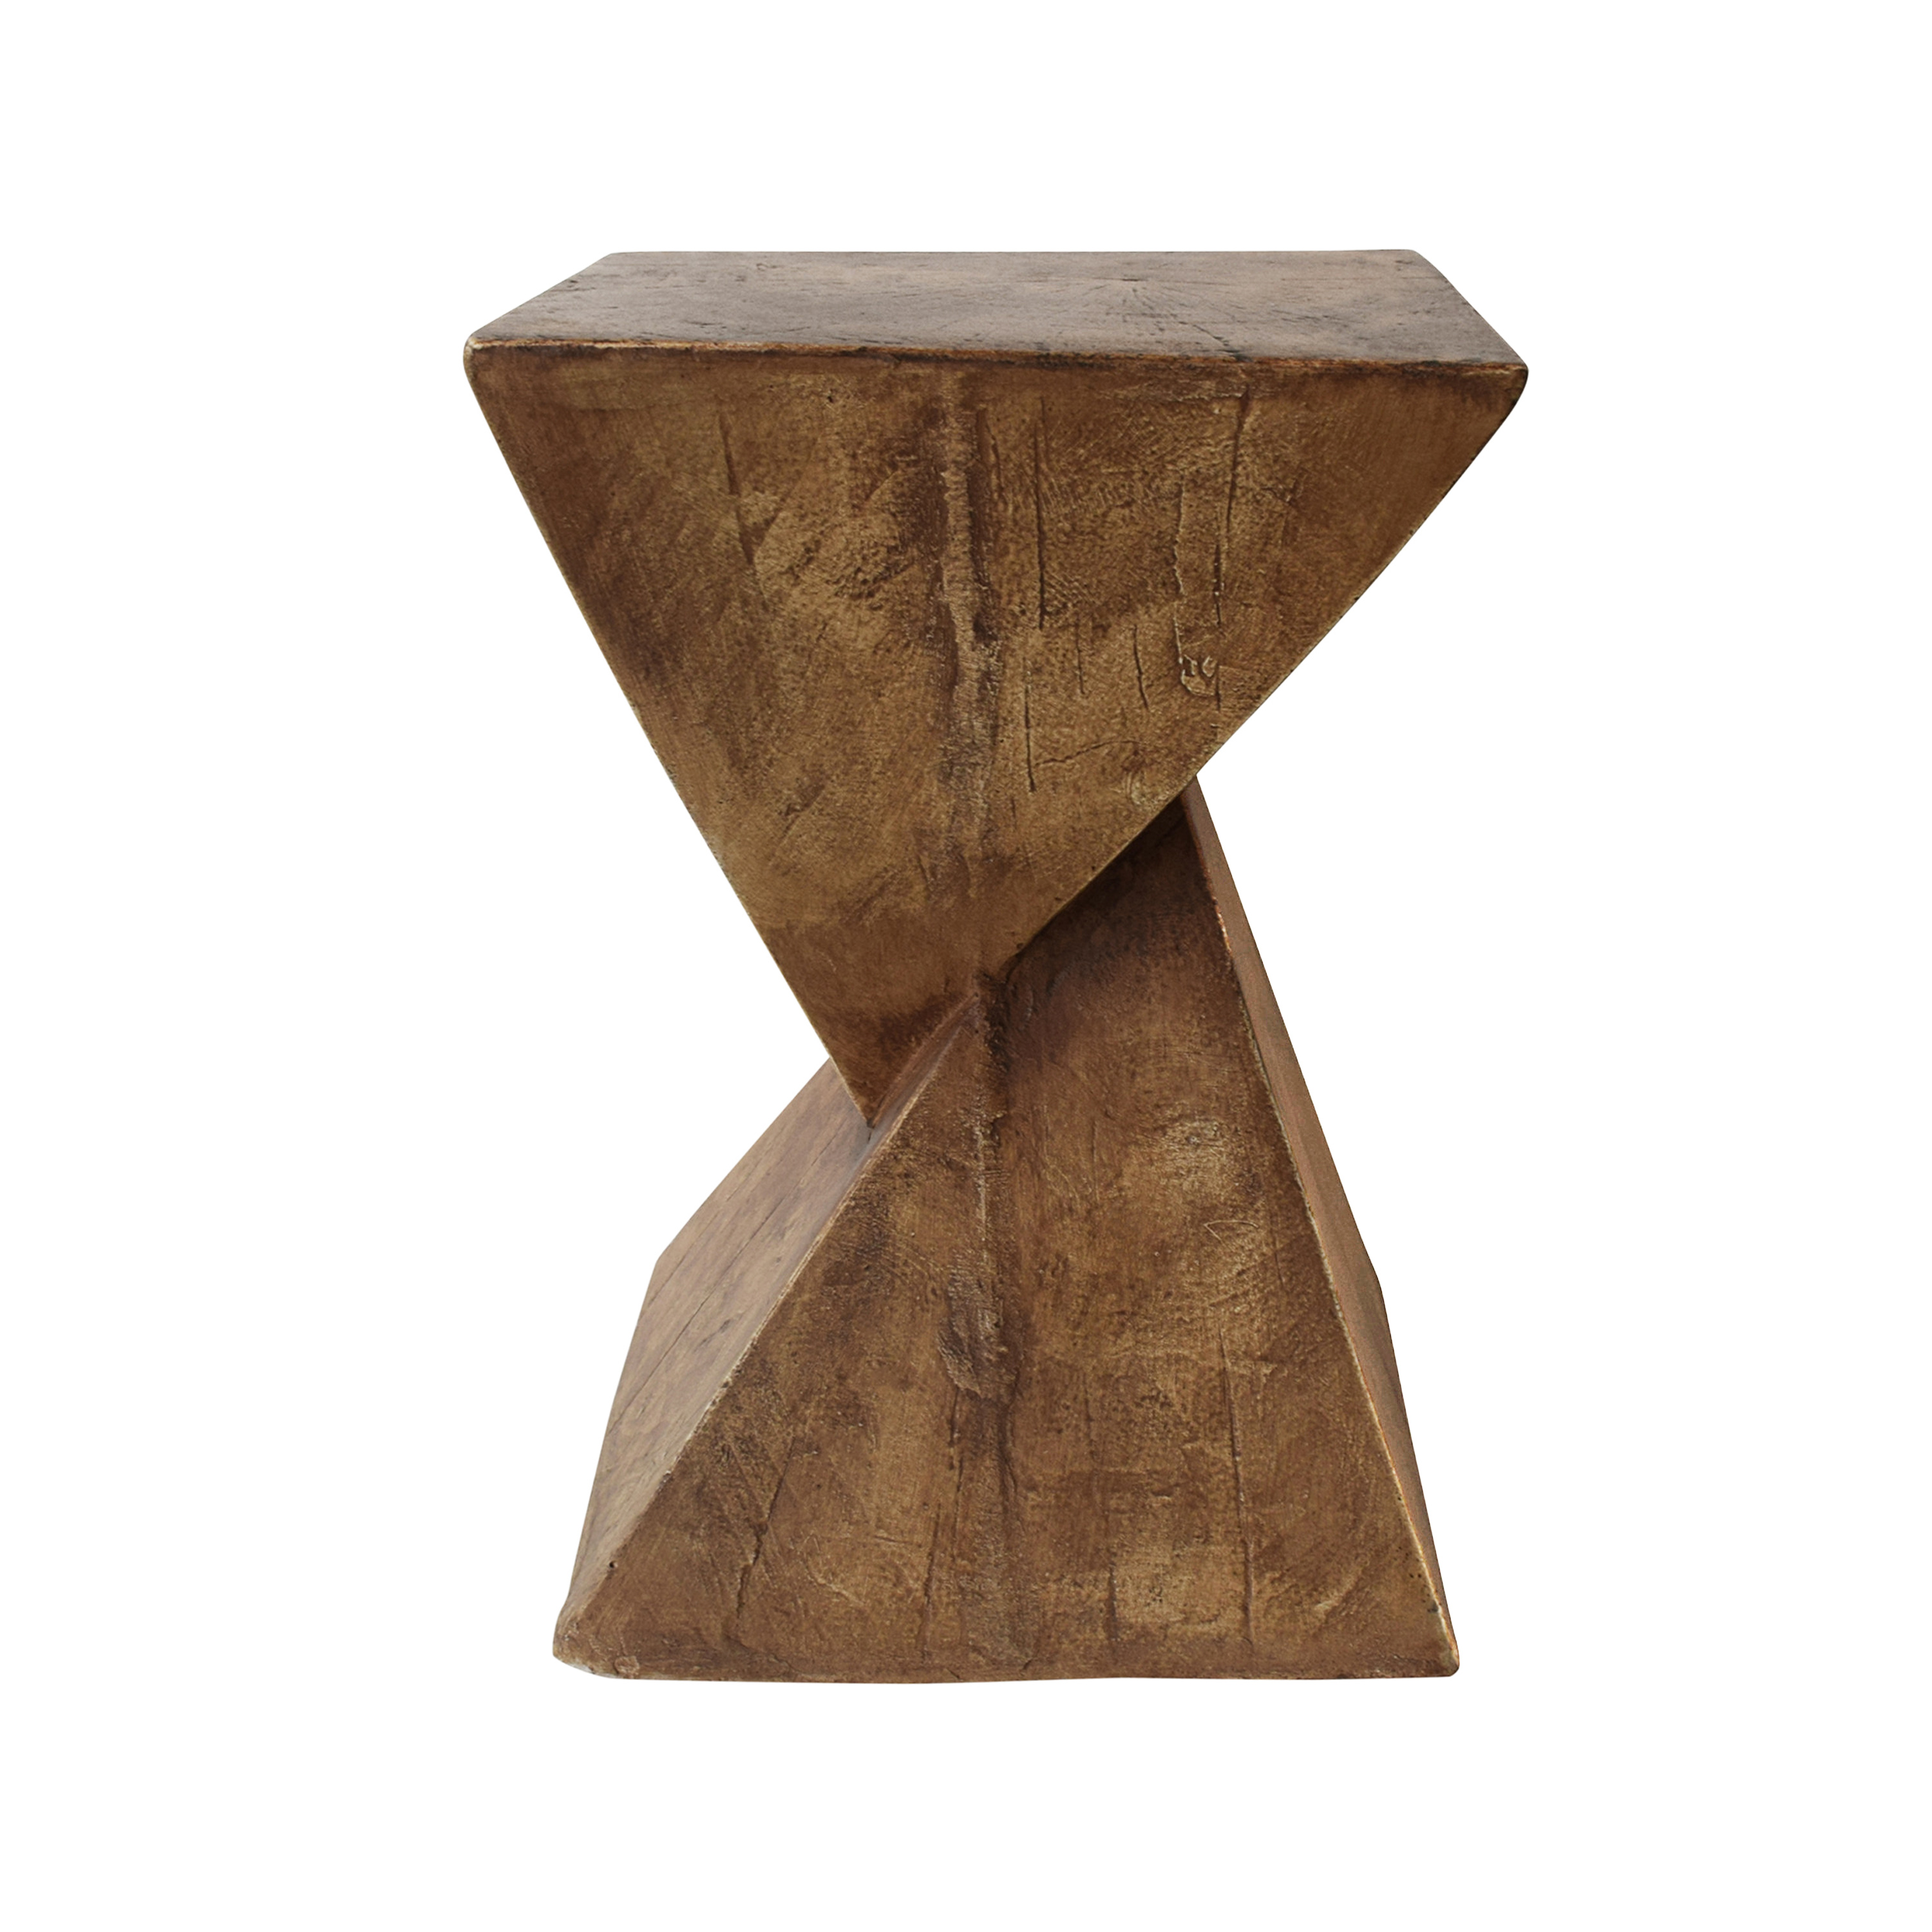 Katie Outdoor Lightweight Concrete Accent Table, Natural - image 4 of 6